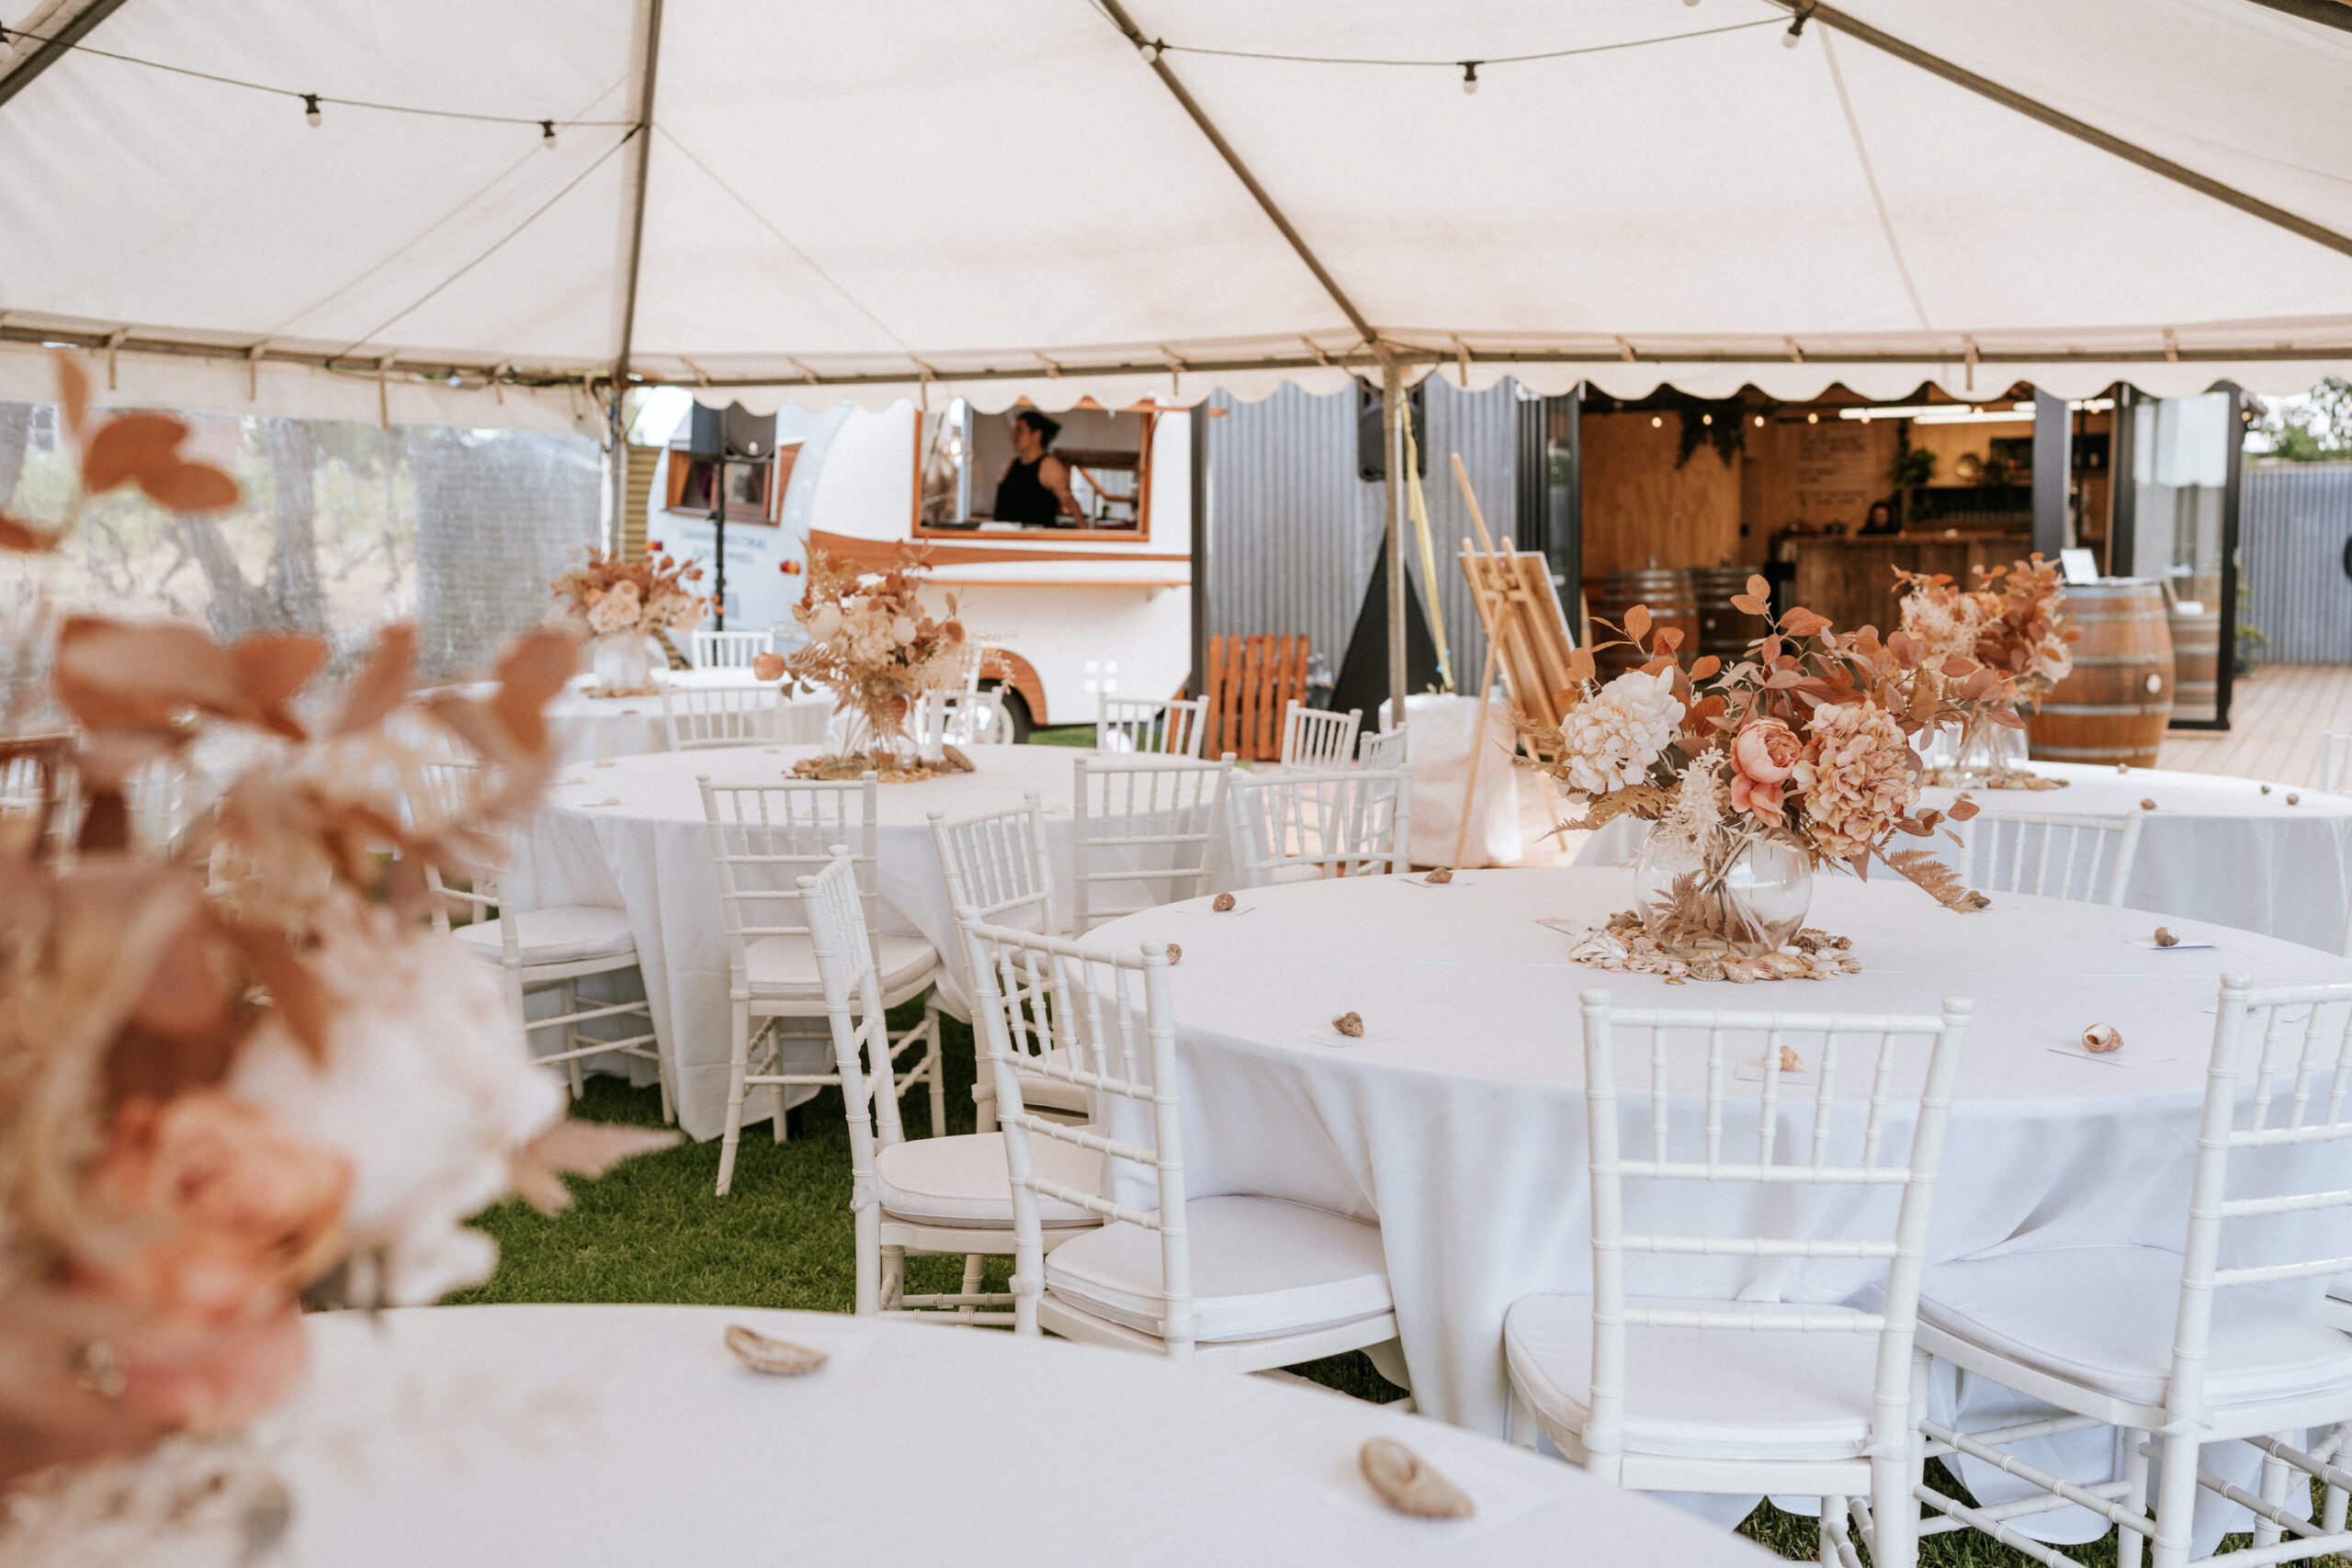 Set amongst the vines and olive orchards of Fleurieu Peninsula’s beautiful McLaren Vale, Hastwell & Lightfoot is a relaxed and flexible venue for weddings and functions, with room for a marquee and accommodation.